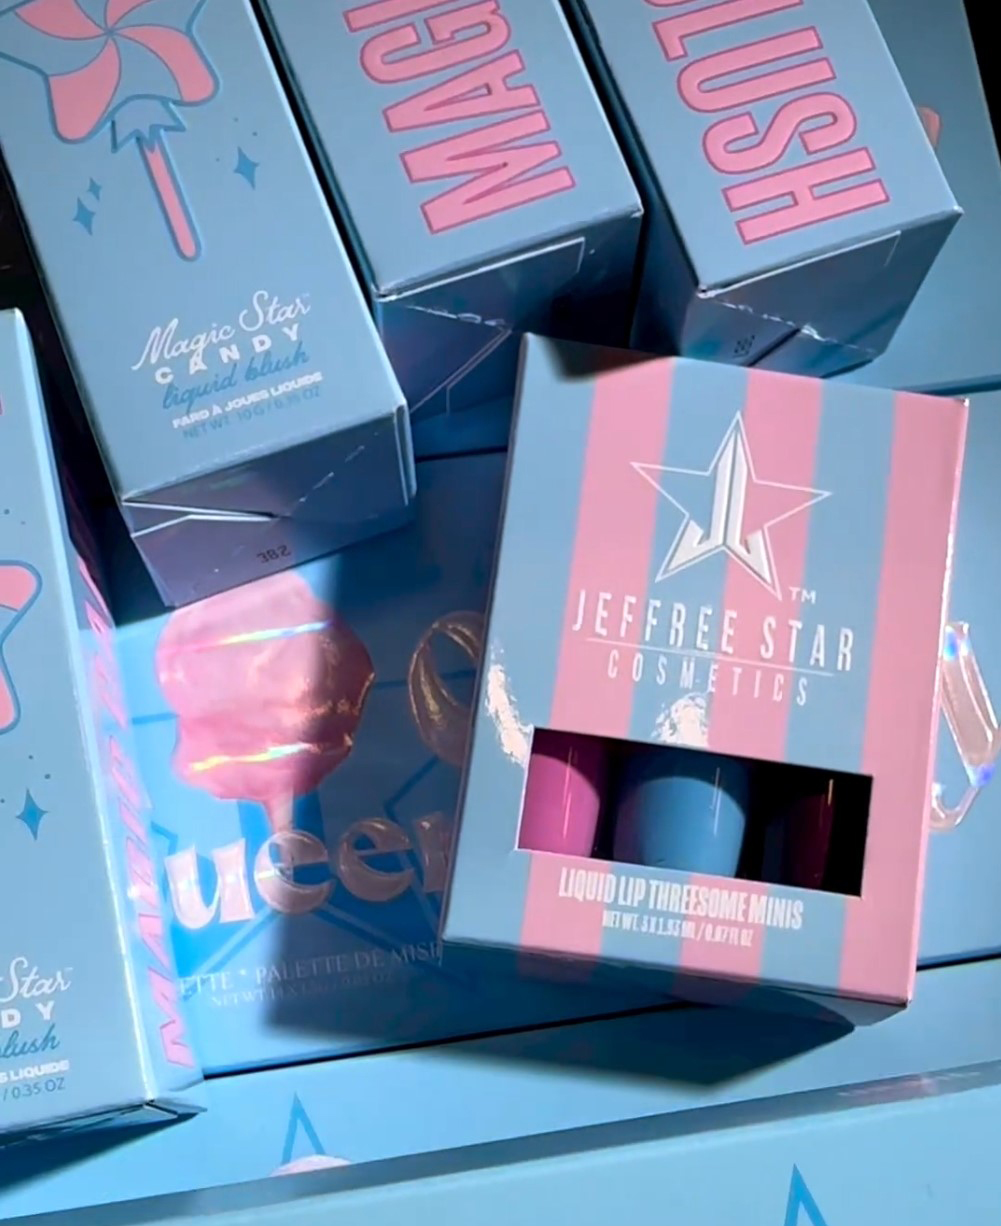 Jeffree Star has announced Cotton Candy Queen Сollection